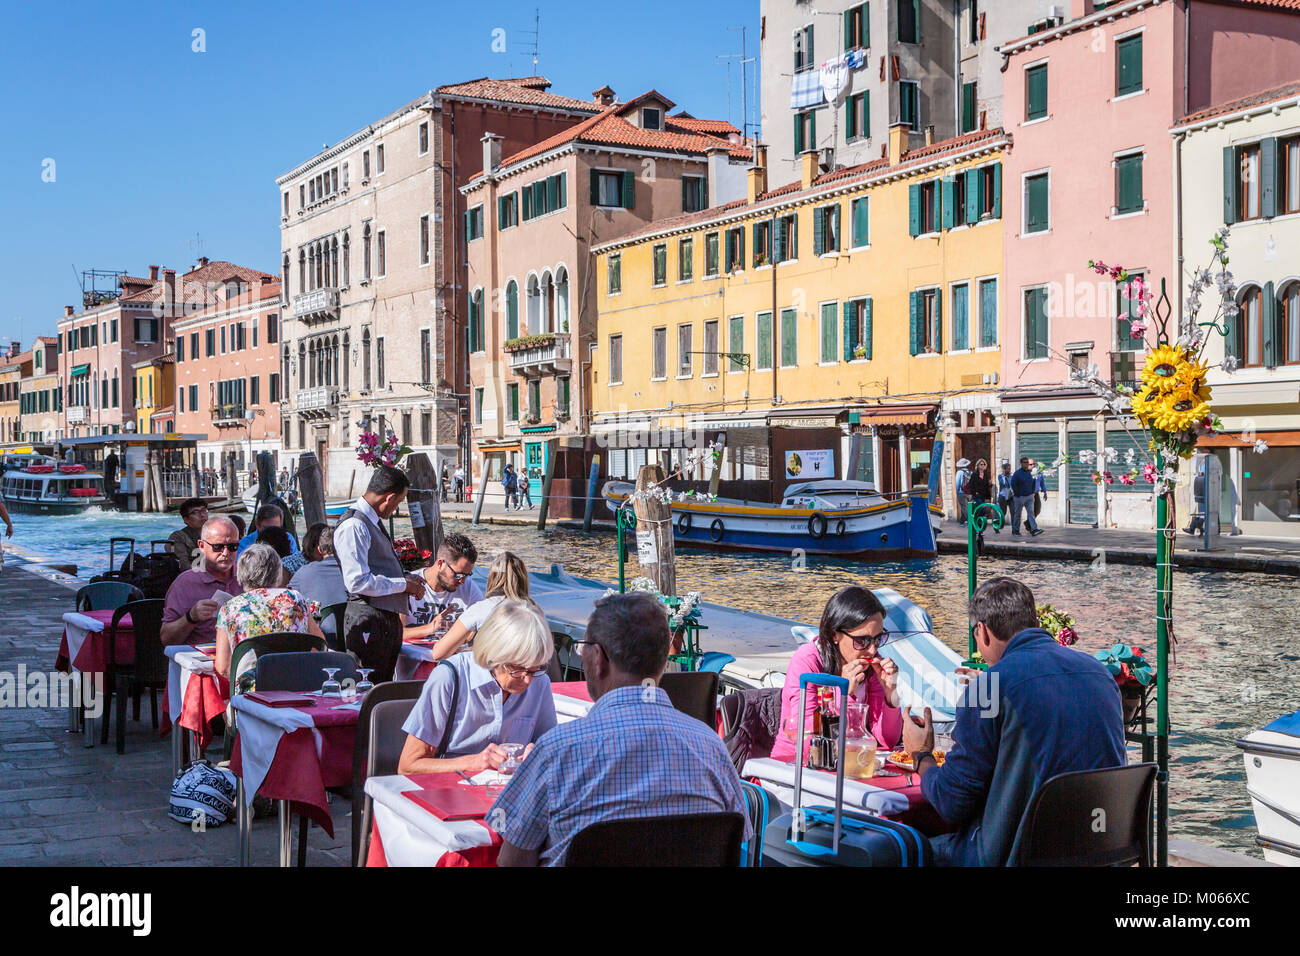 People eating at a canalside restaurant in Veneto, Venice, Italy, Europe. Stock Photo